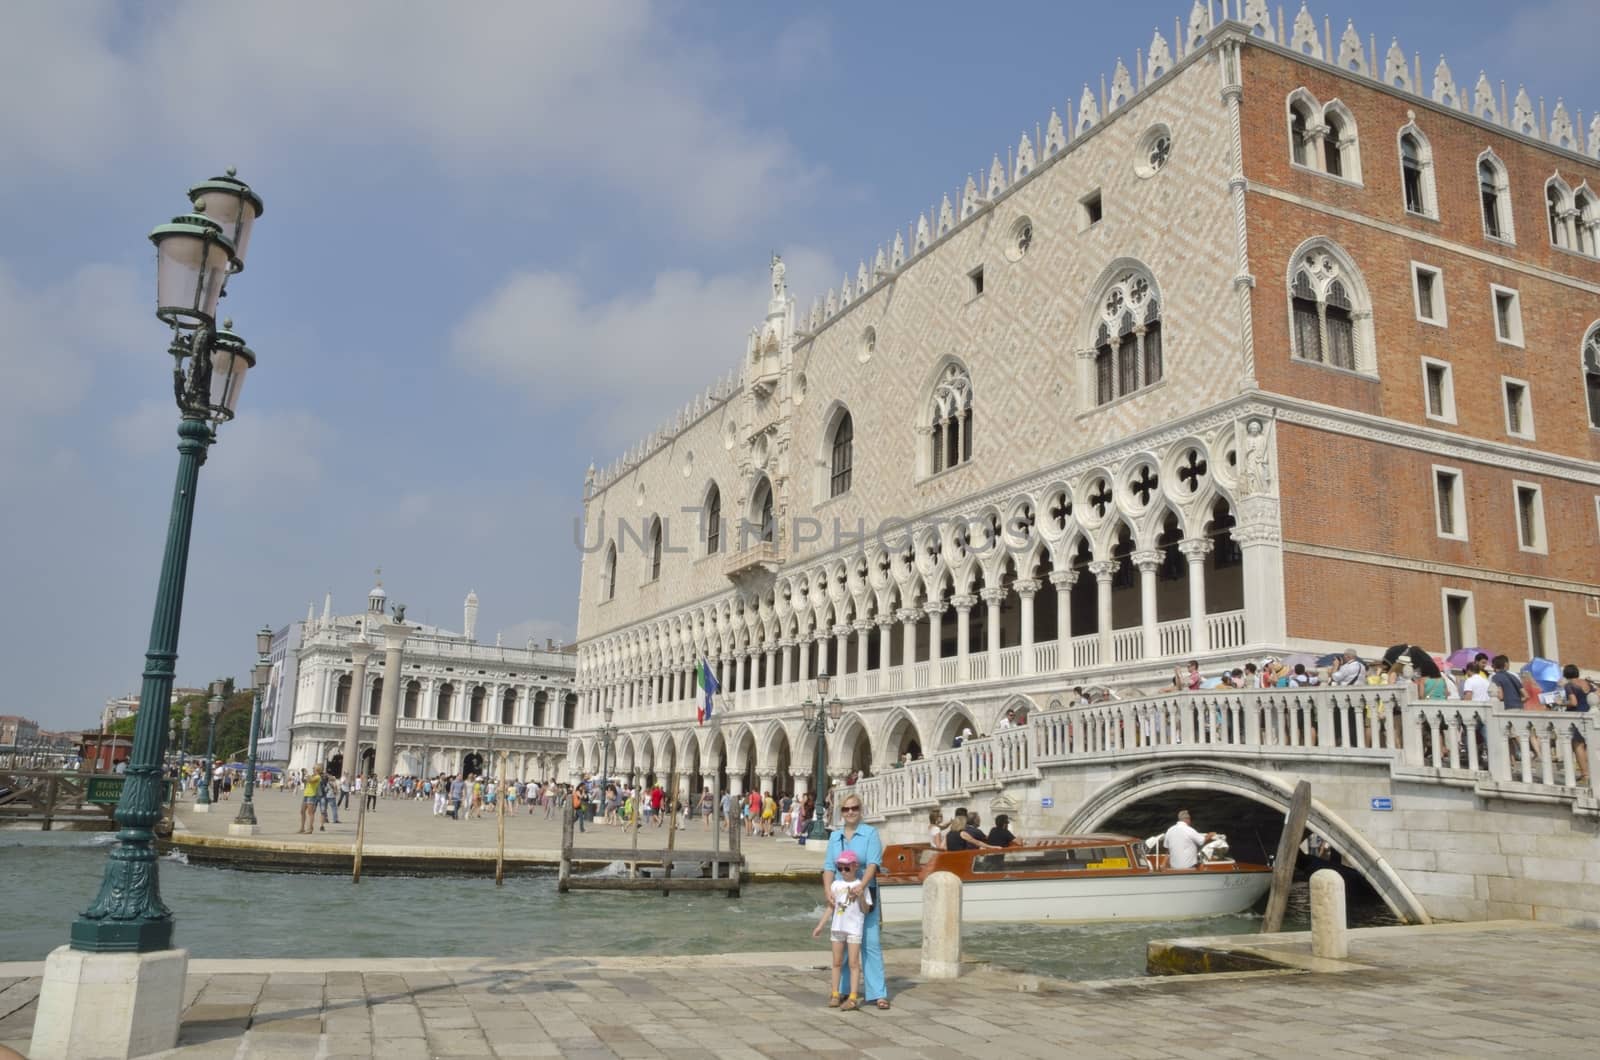 People around the Doge Palace,  built in Venetian Gothic style, and one of the main landmarks of the city of Venice, northern Italy. 